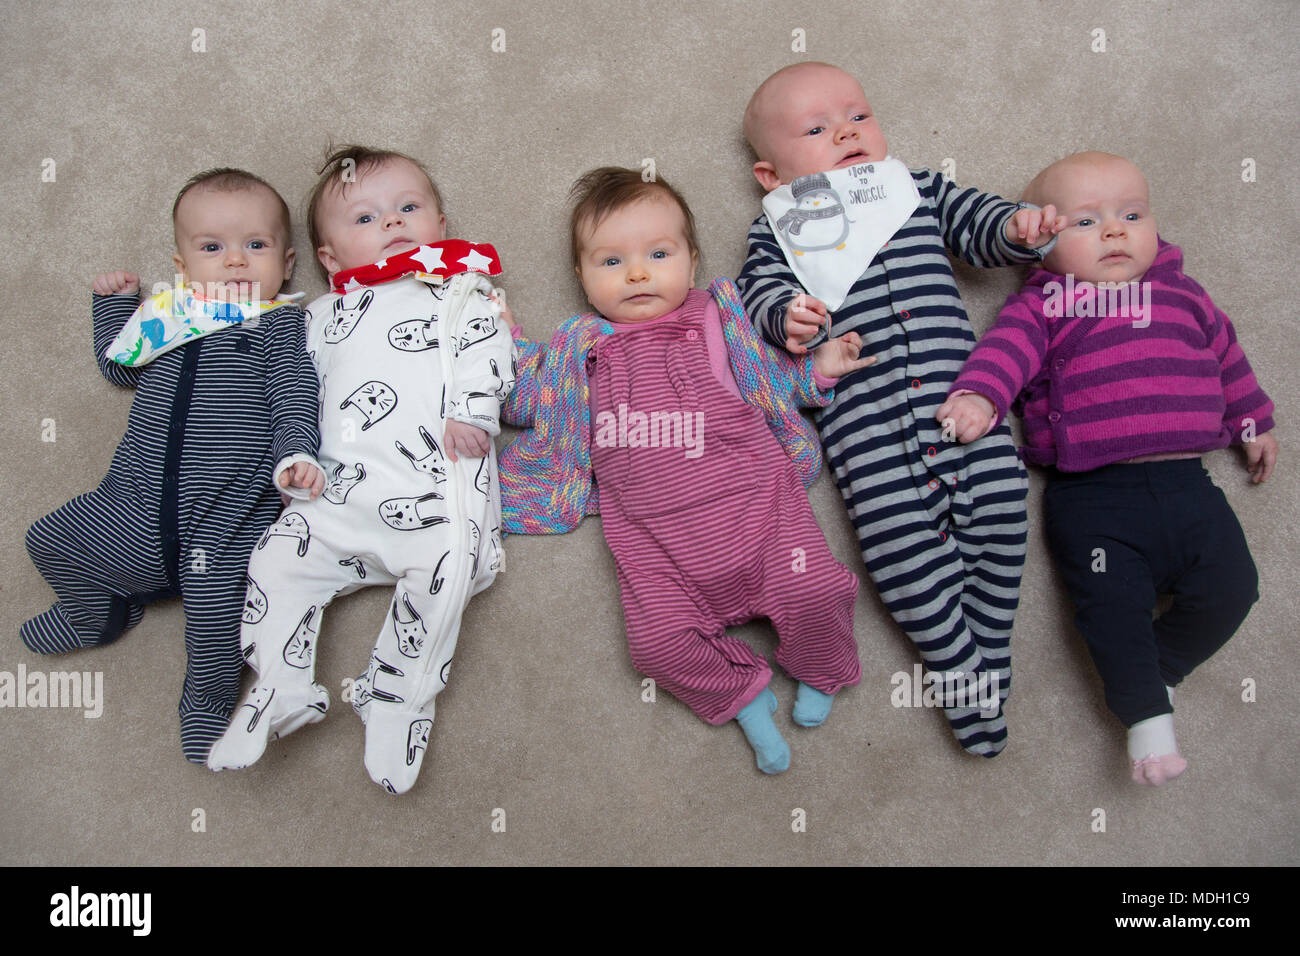 group of cute babies Stock Photo